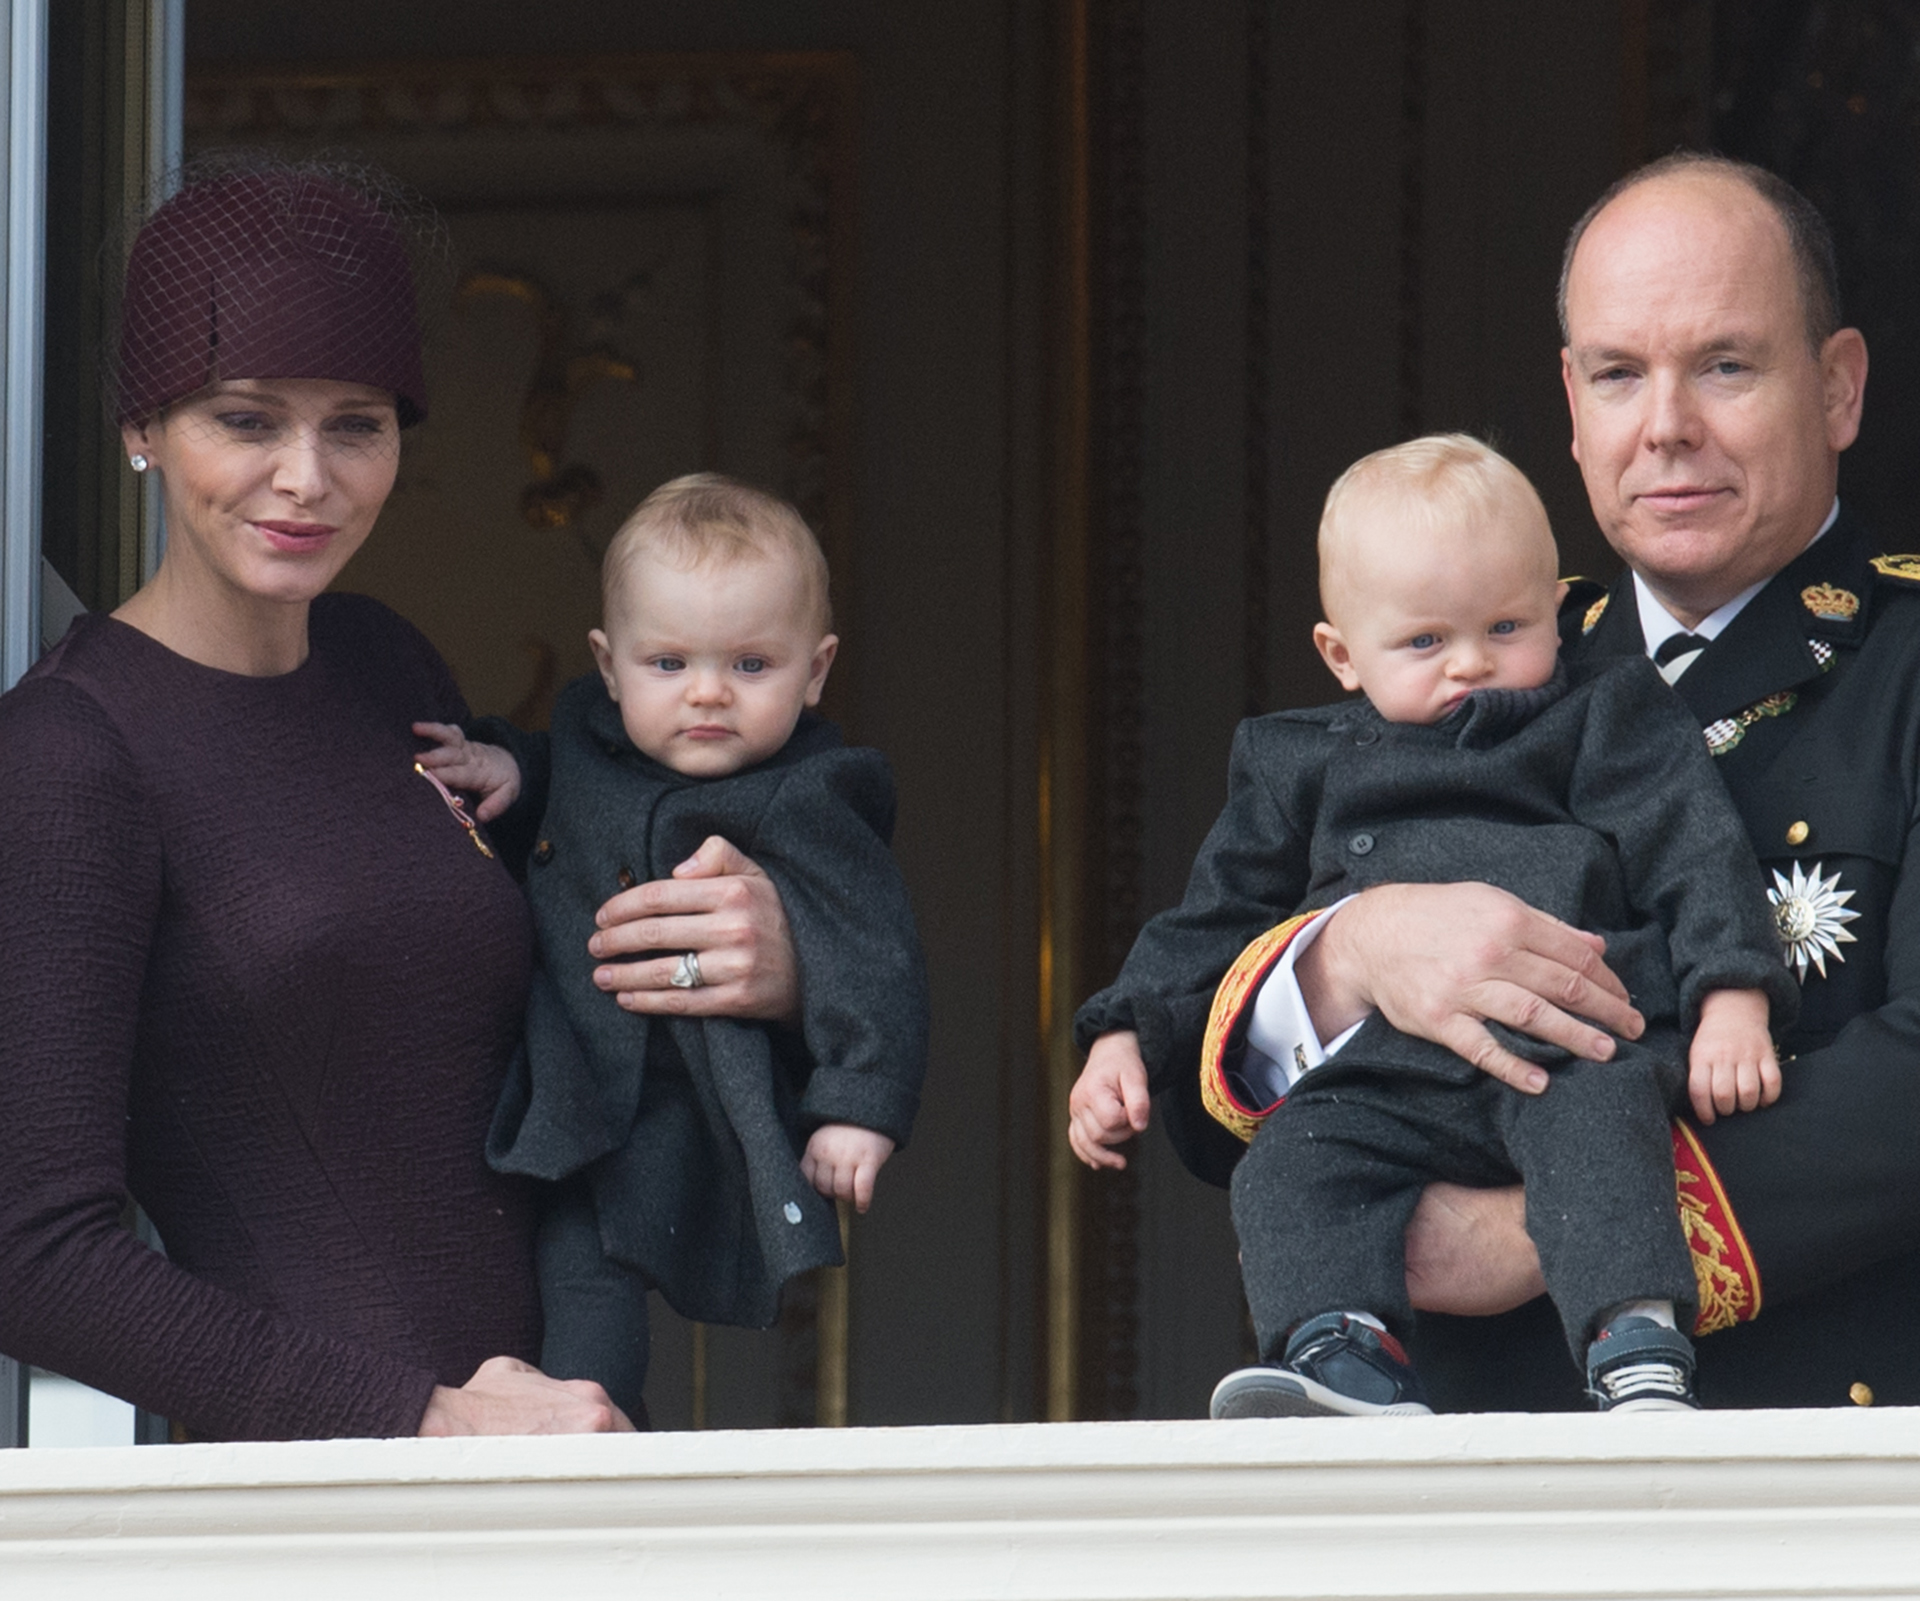 Monaco’s royal twins complete perfect family picture